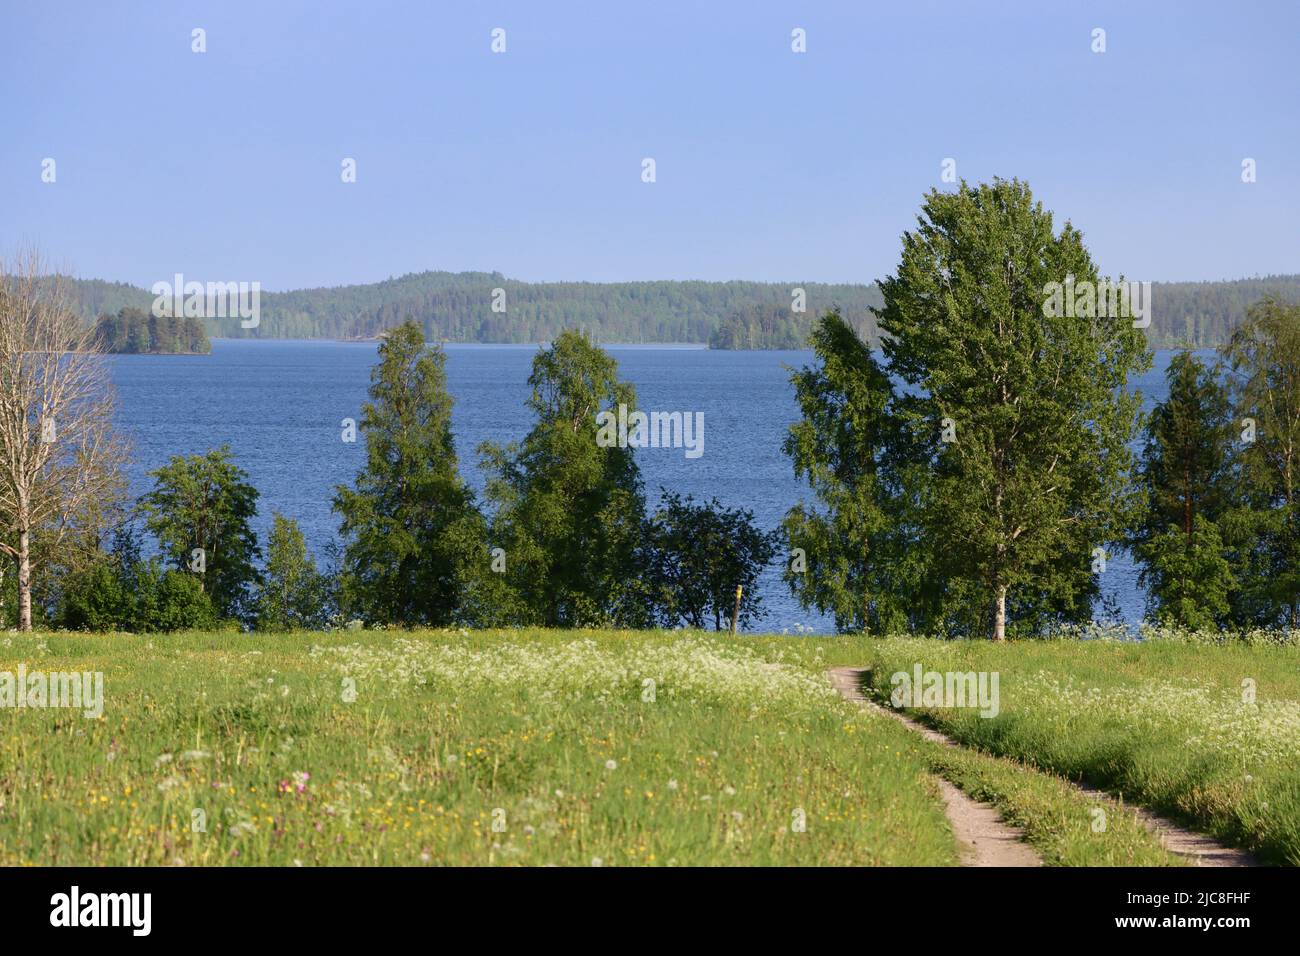 View over Lake Pyhäjärvi at Uukuniemi border zone on the Finland side of the Finland-Russia borden.  Russia on the far side of lake. Stock Photo